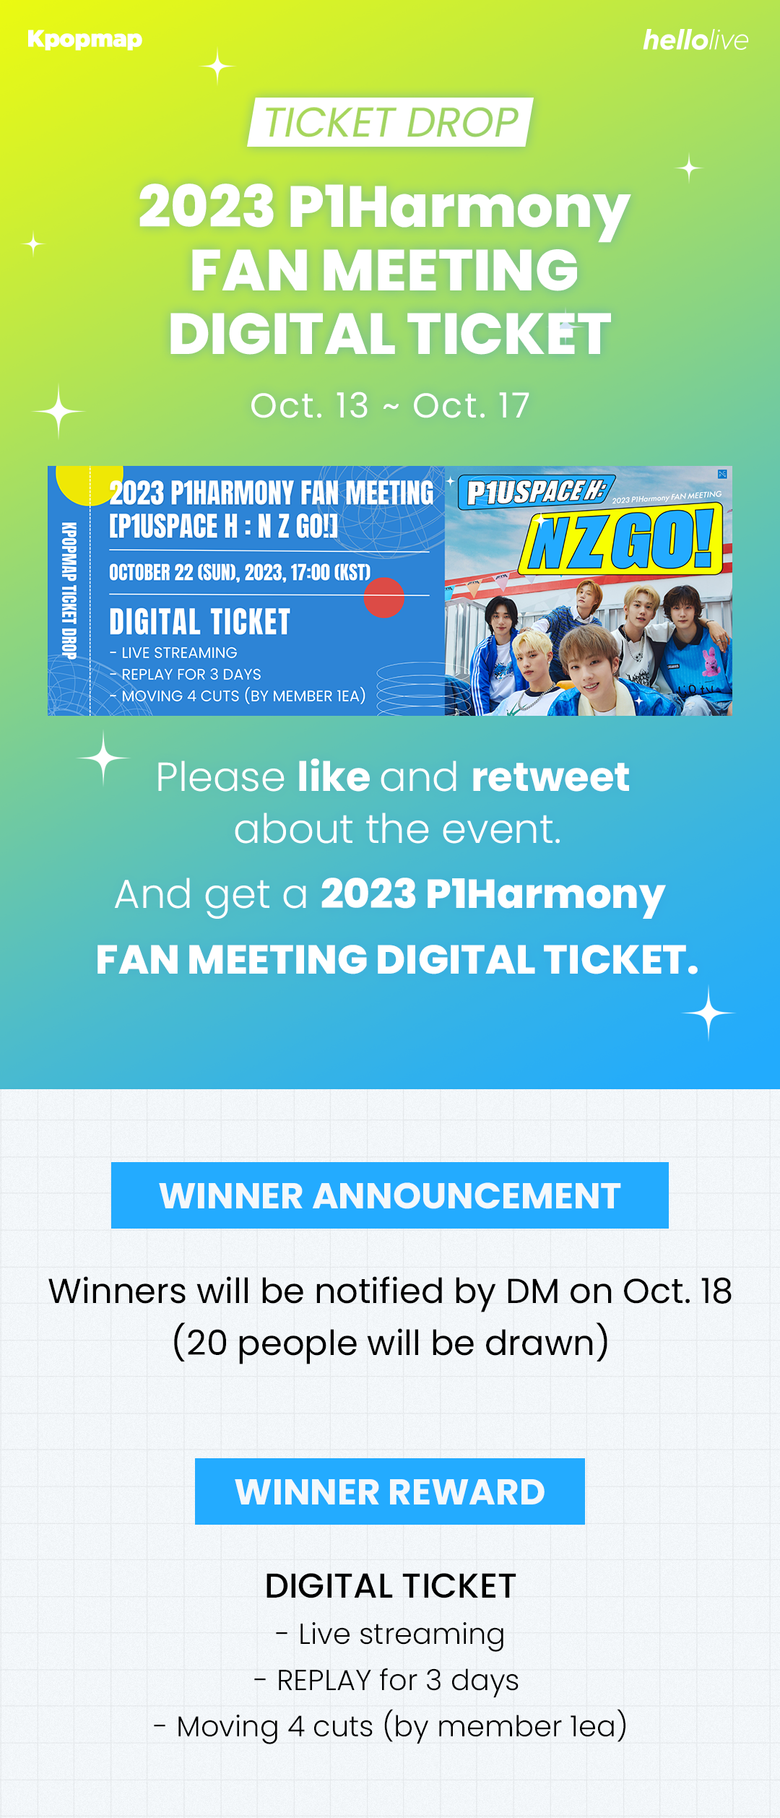 Participate in the RT event and get a P1Harmony Fan Meeting Digital Ticket!